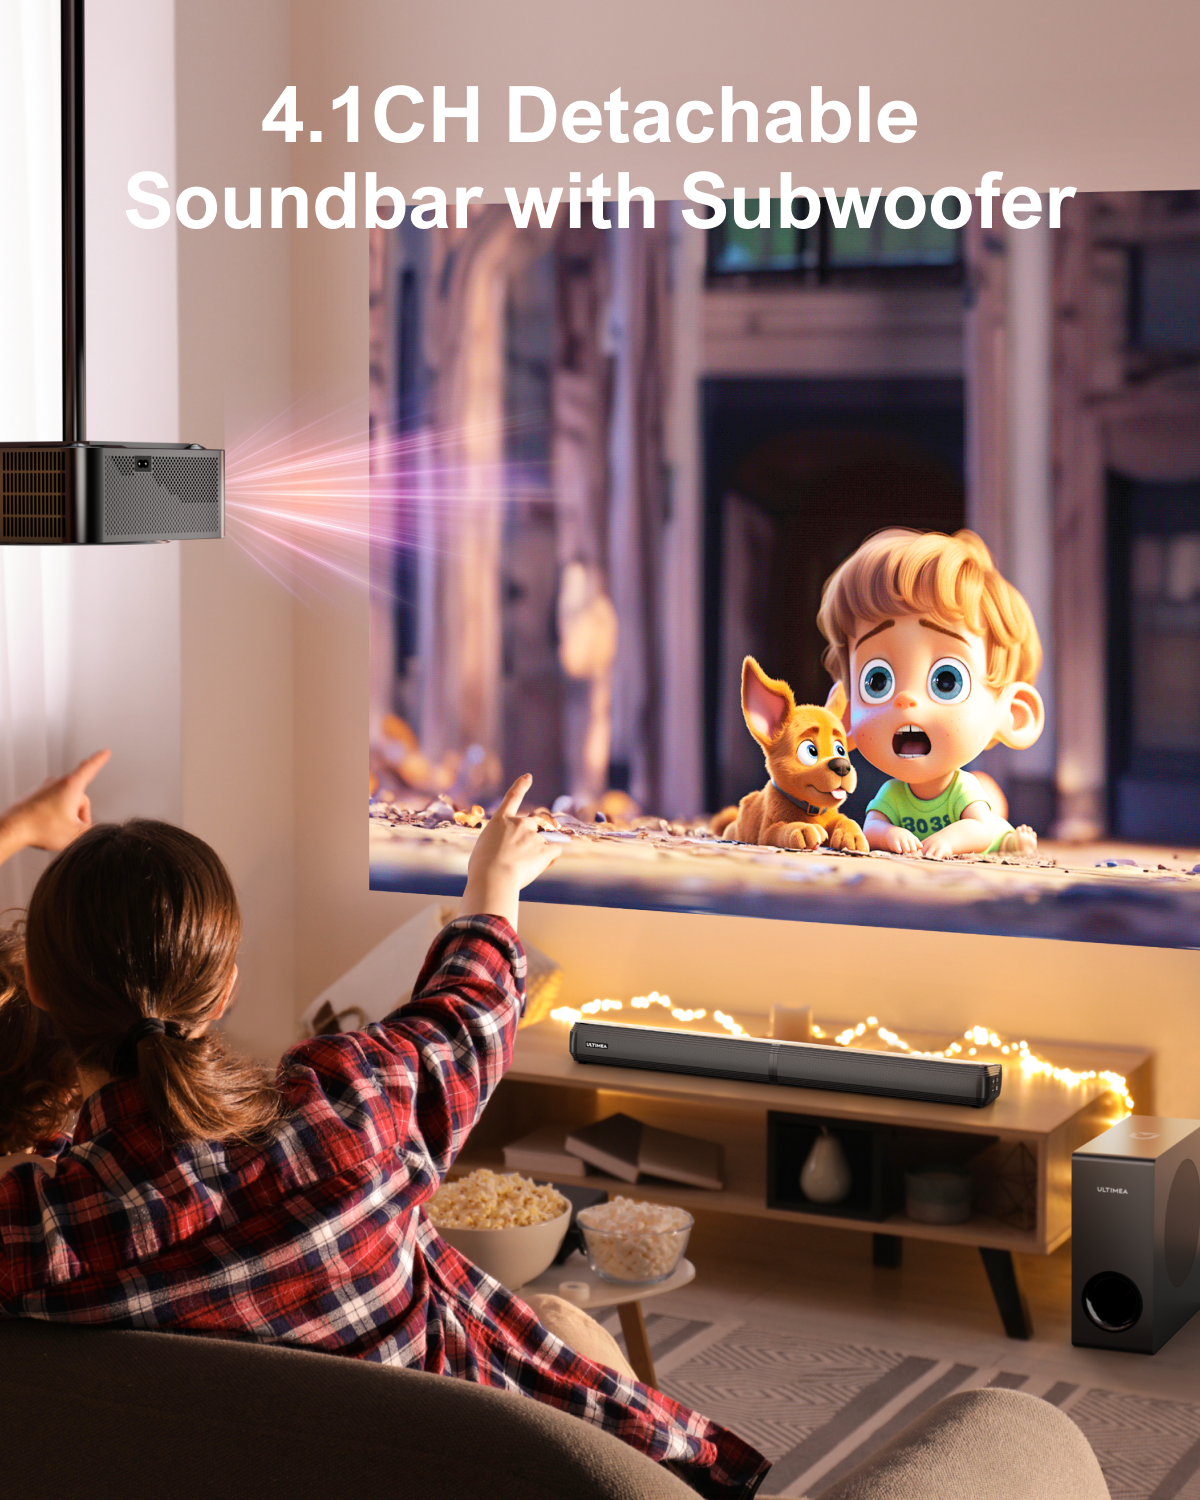 ULTIMEA 4.1ch Sound Bars for TV with Subwoofer, 2-in-1 Detachable Soundbar for TV, Bluetooth 5.3 Sound Bar, 3 EQ Modes & BASSMX TV Speakers, ARC/Optical/Aux, Wall Mount, Apollo S50 Detachable Series - image 3 of 9